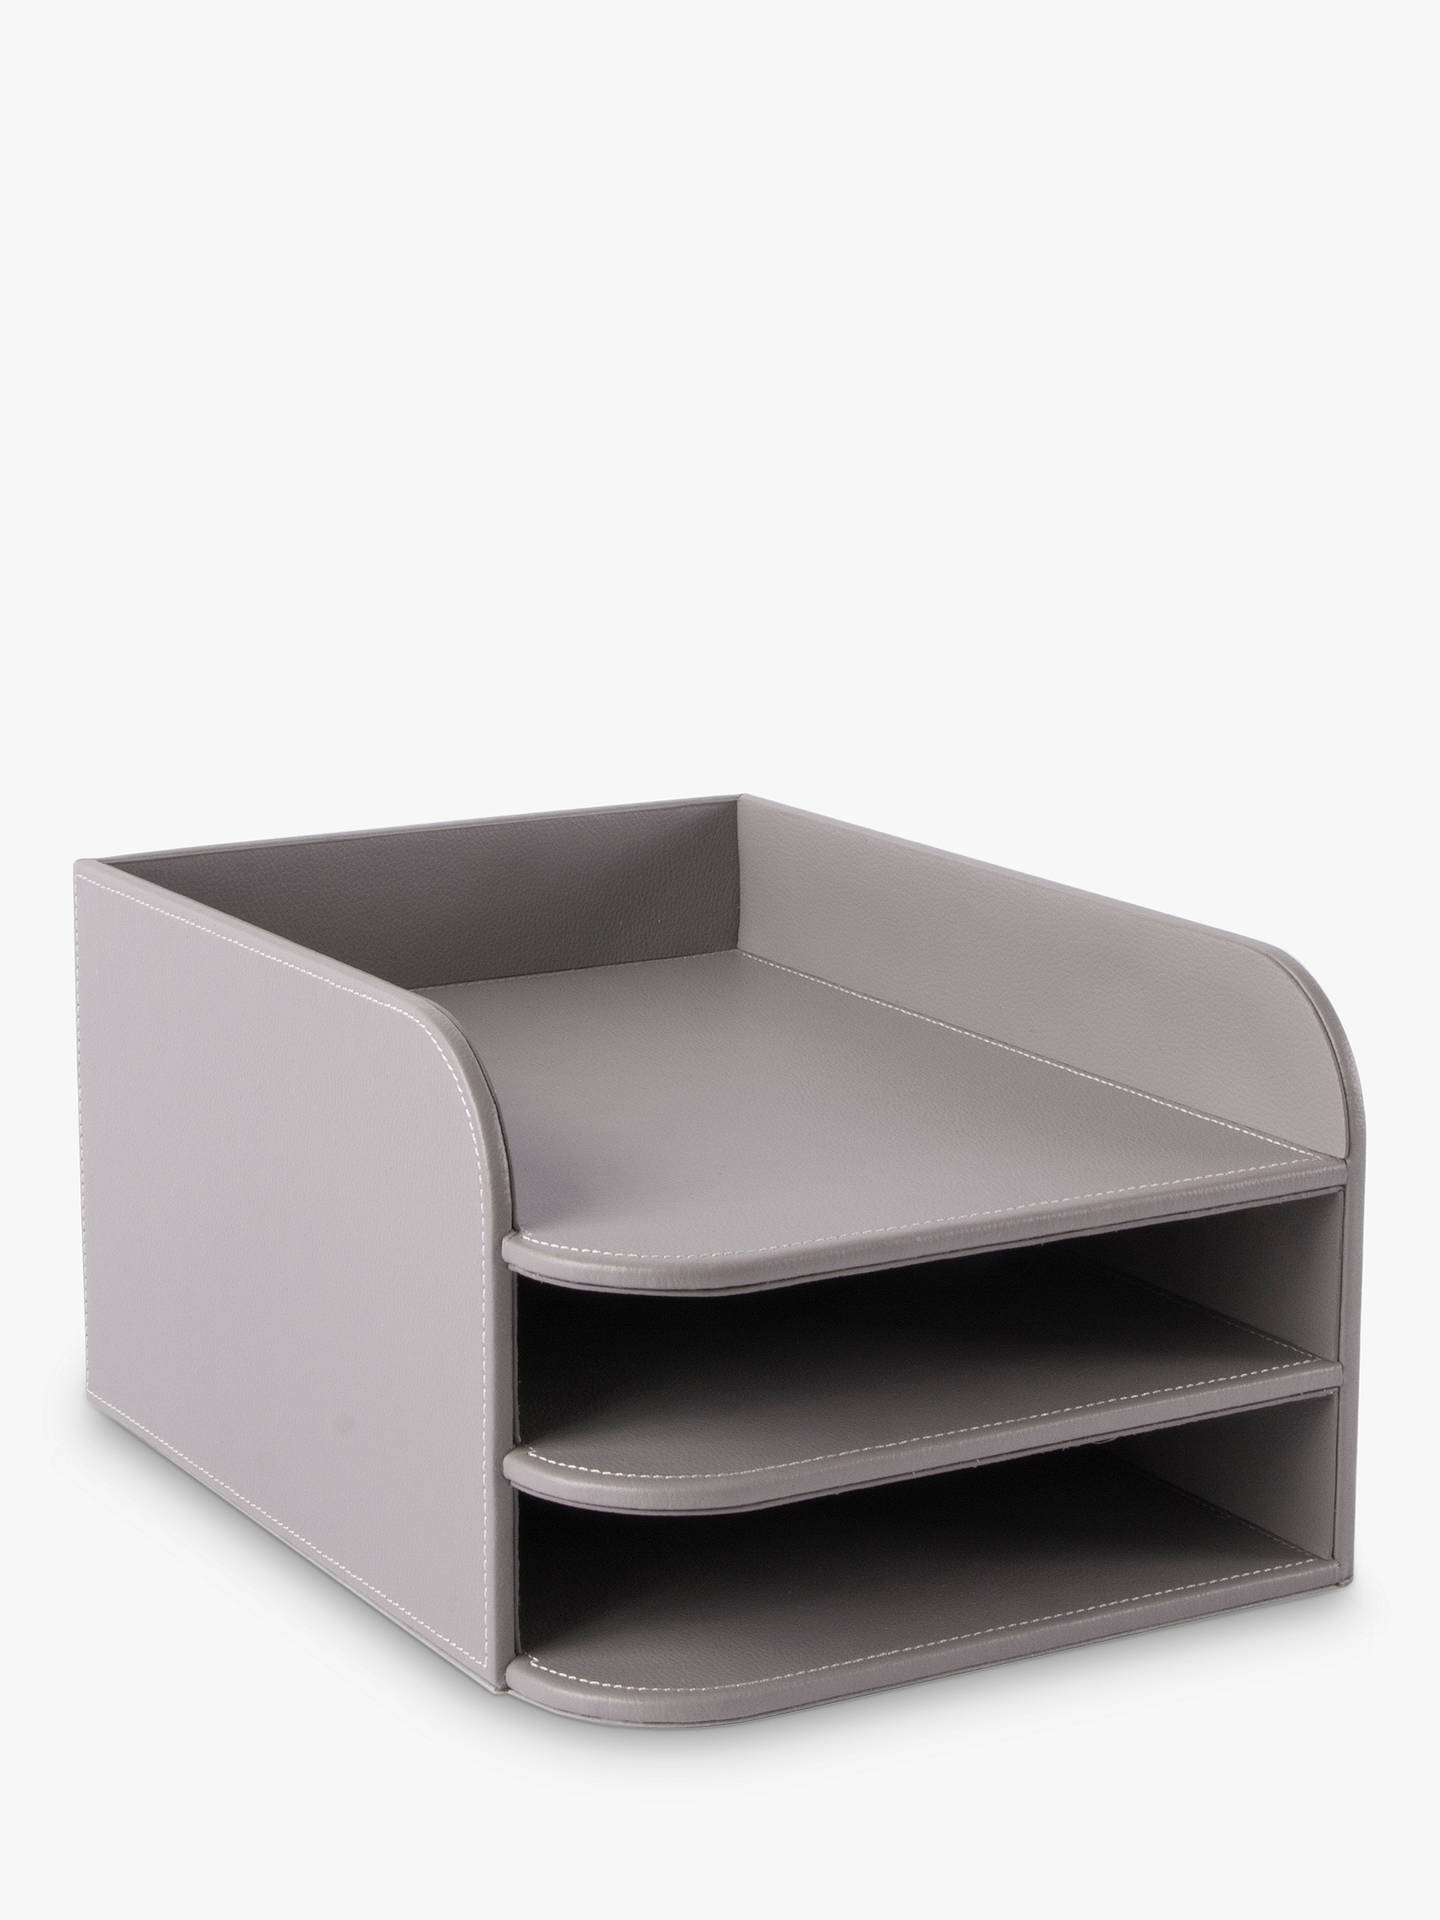 Osco Faux Leather 3 Tier Tray At John Lewis Partners